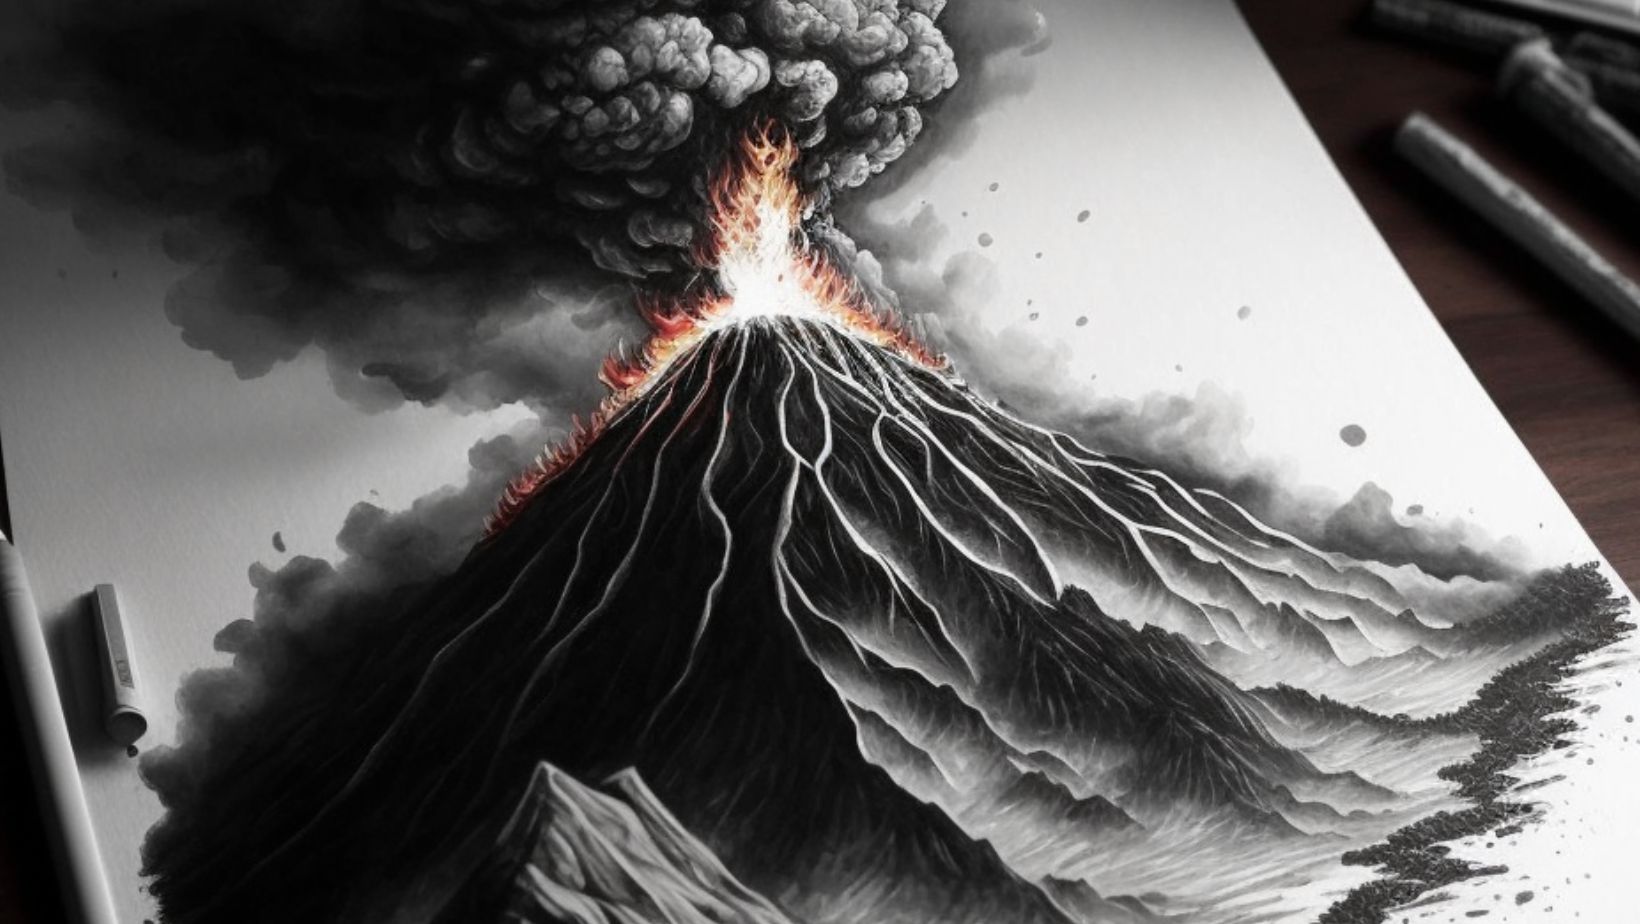 15 facts about volcanoes you probably didn’t know